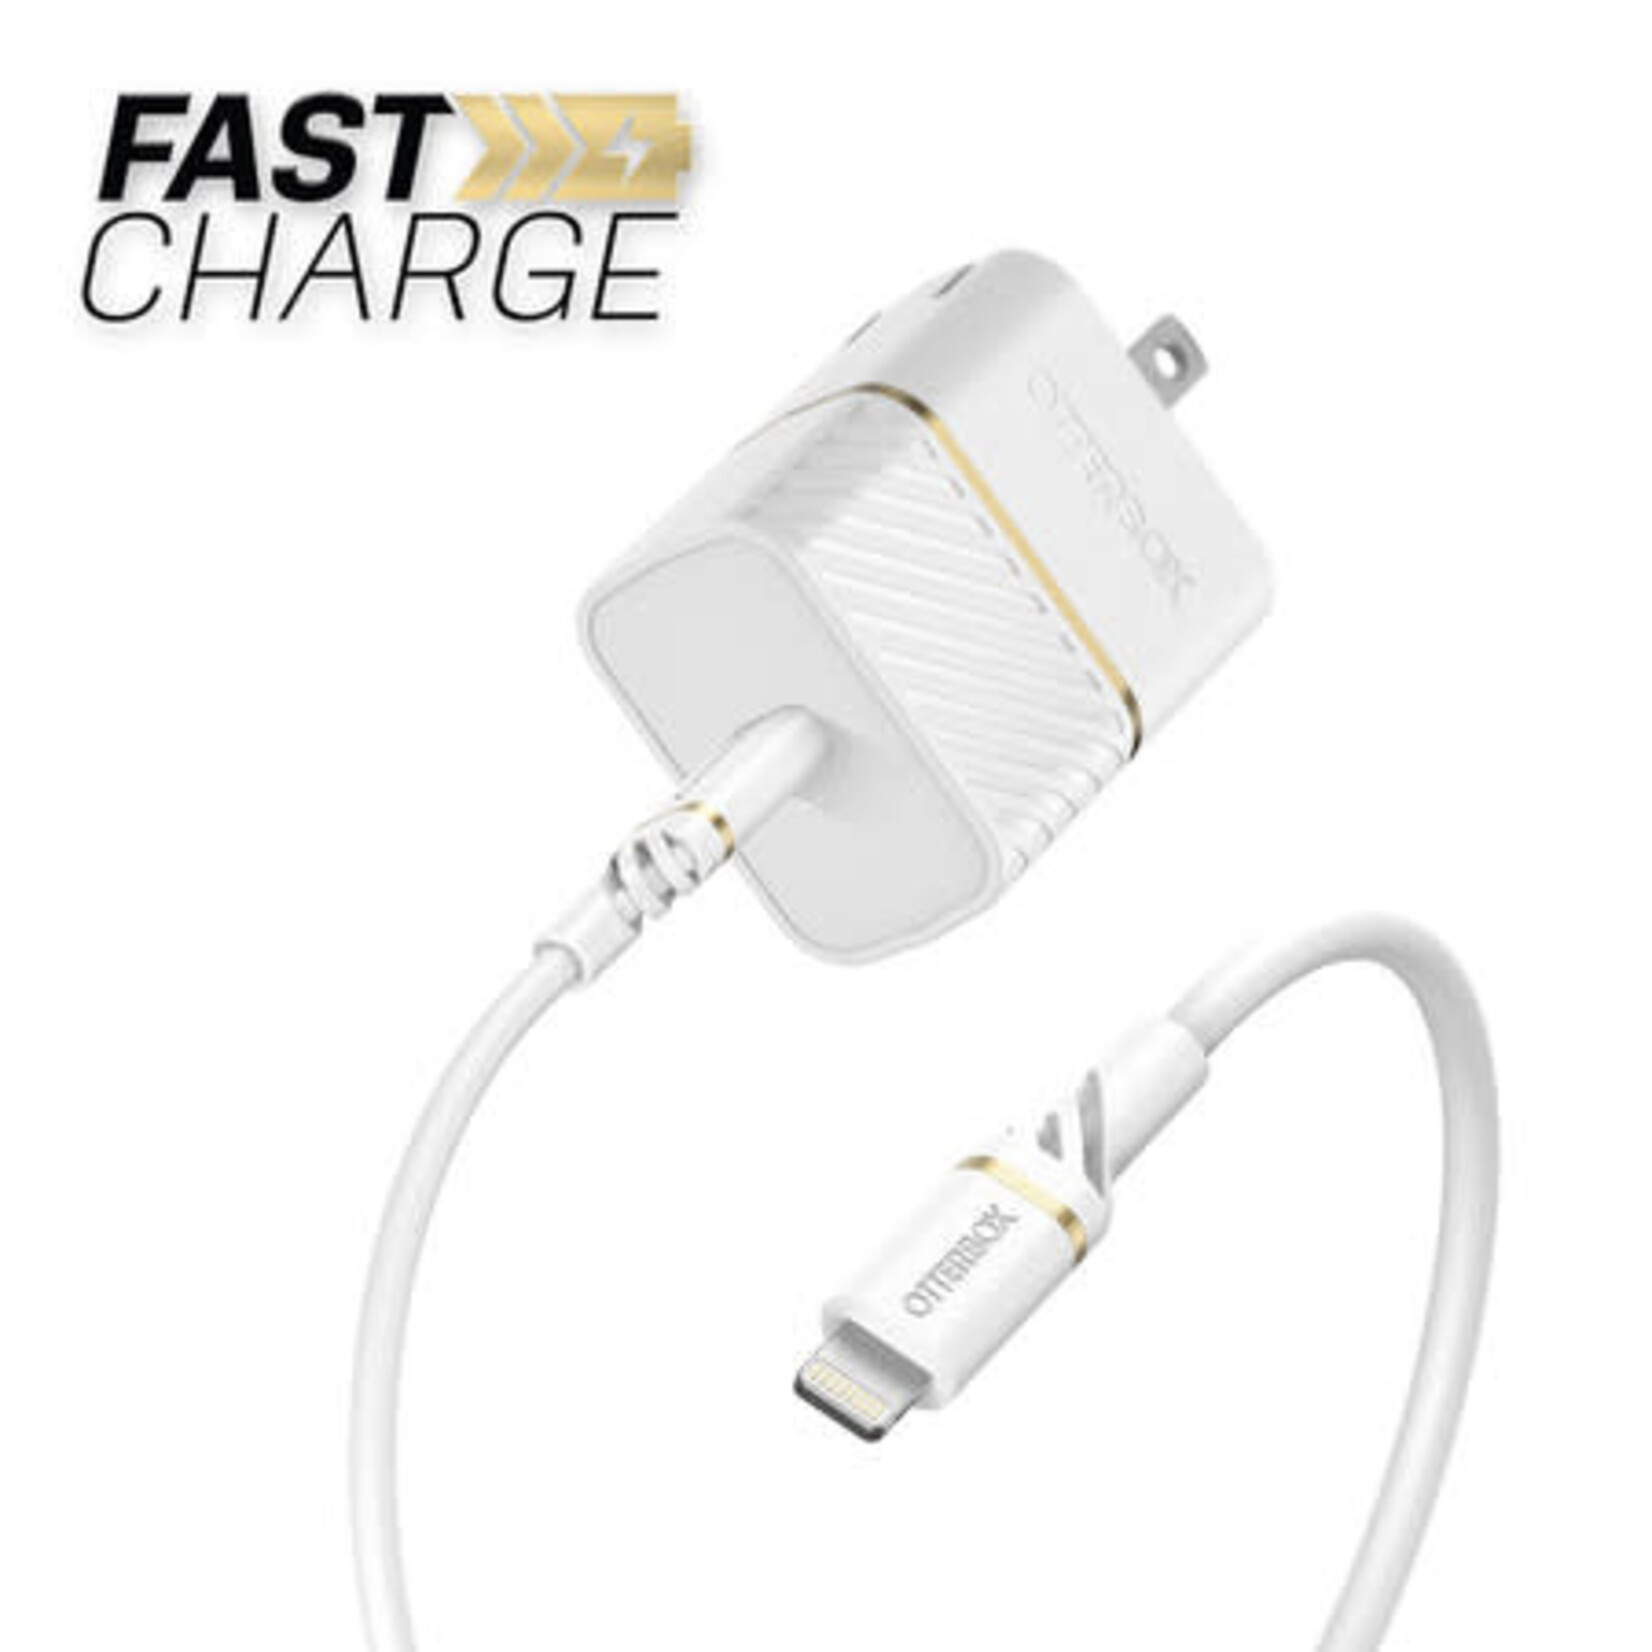 Chargeur Mural Fast Charge 20W avec Câble Lightning 3.3ft